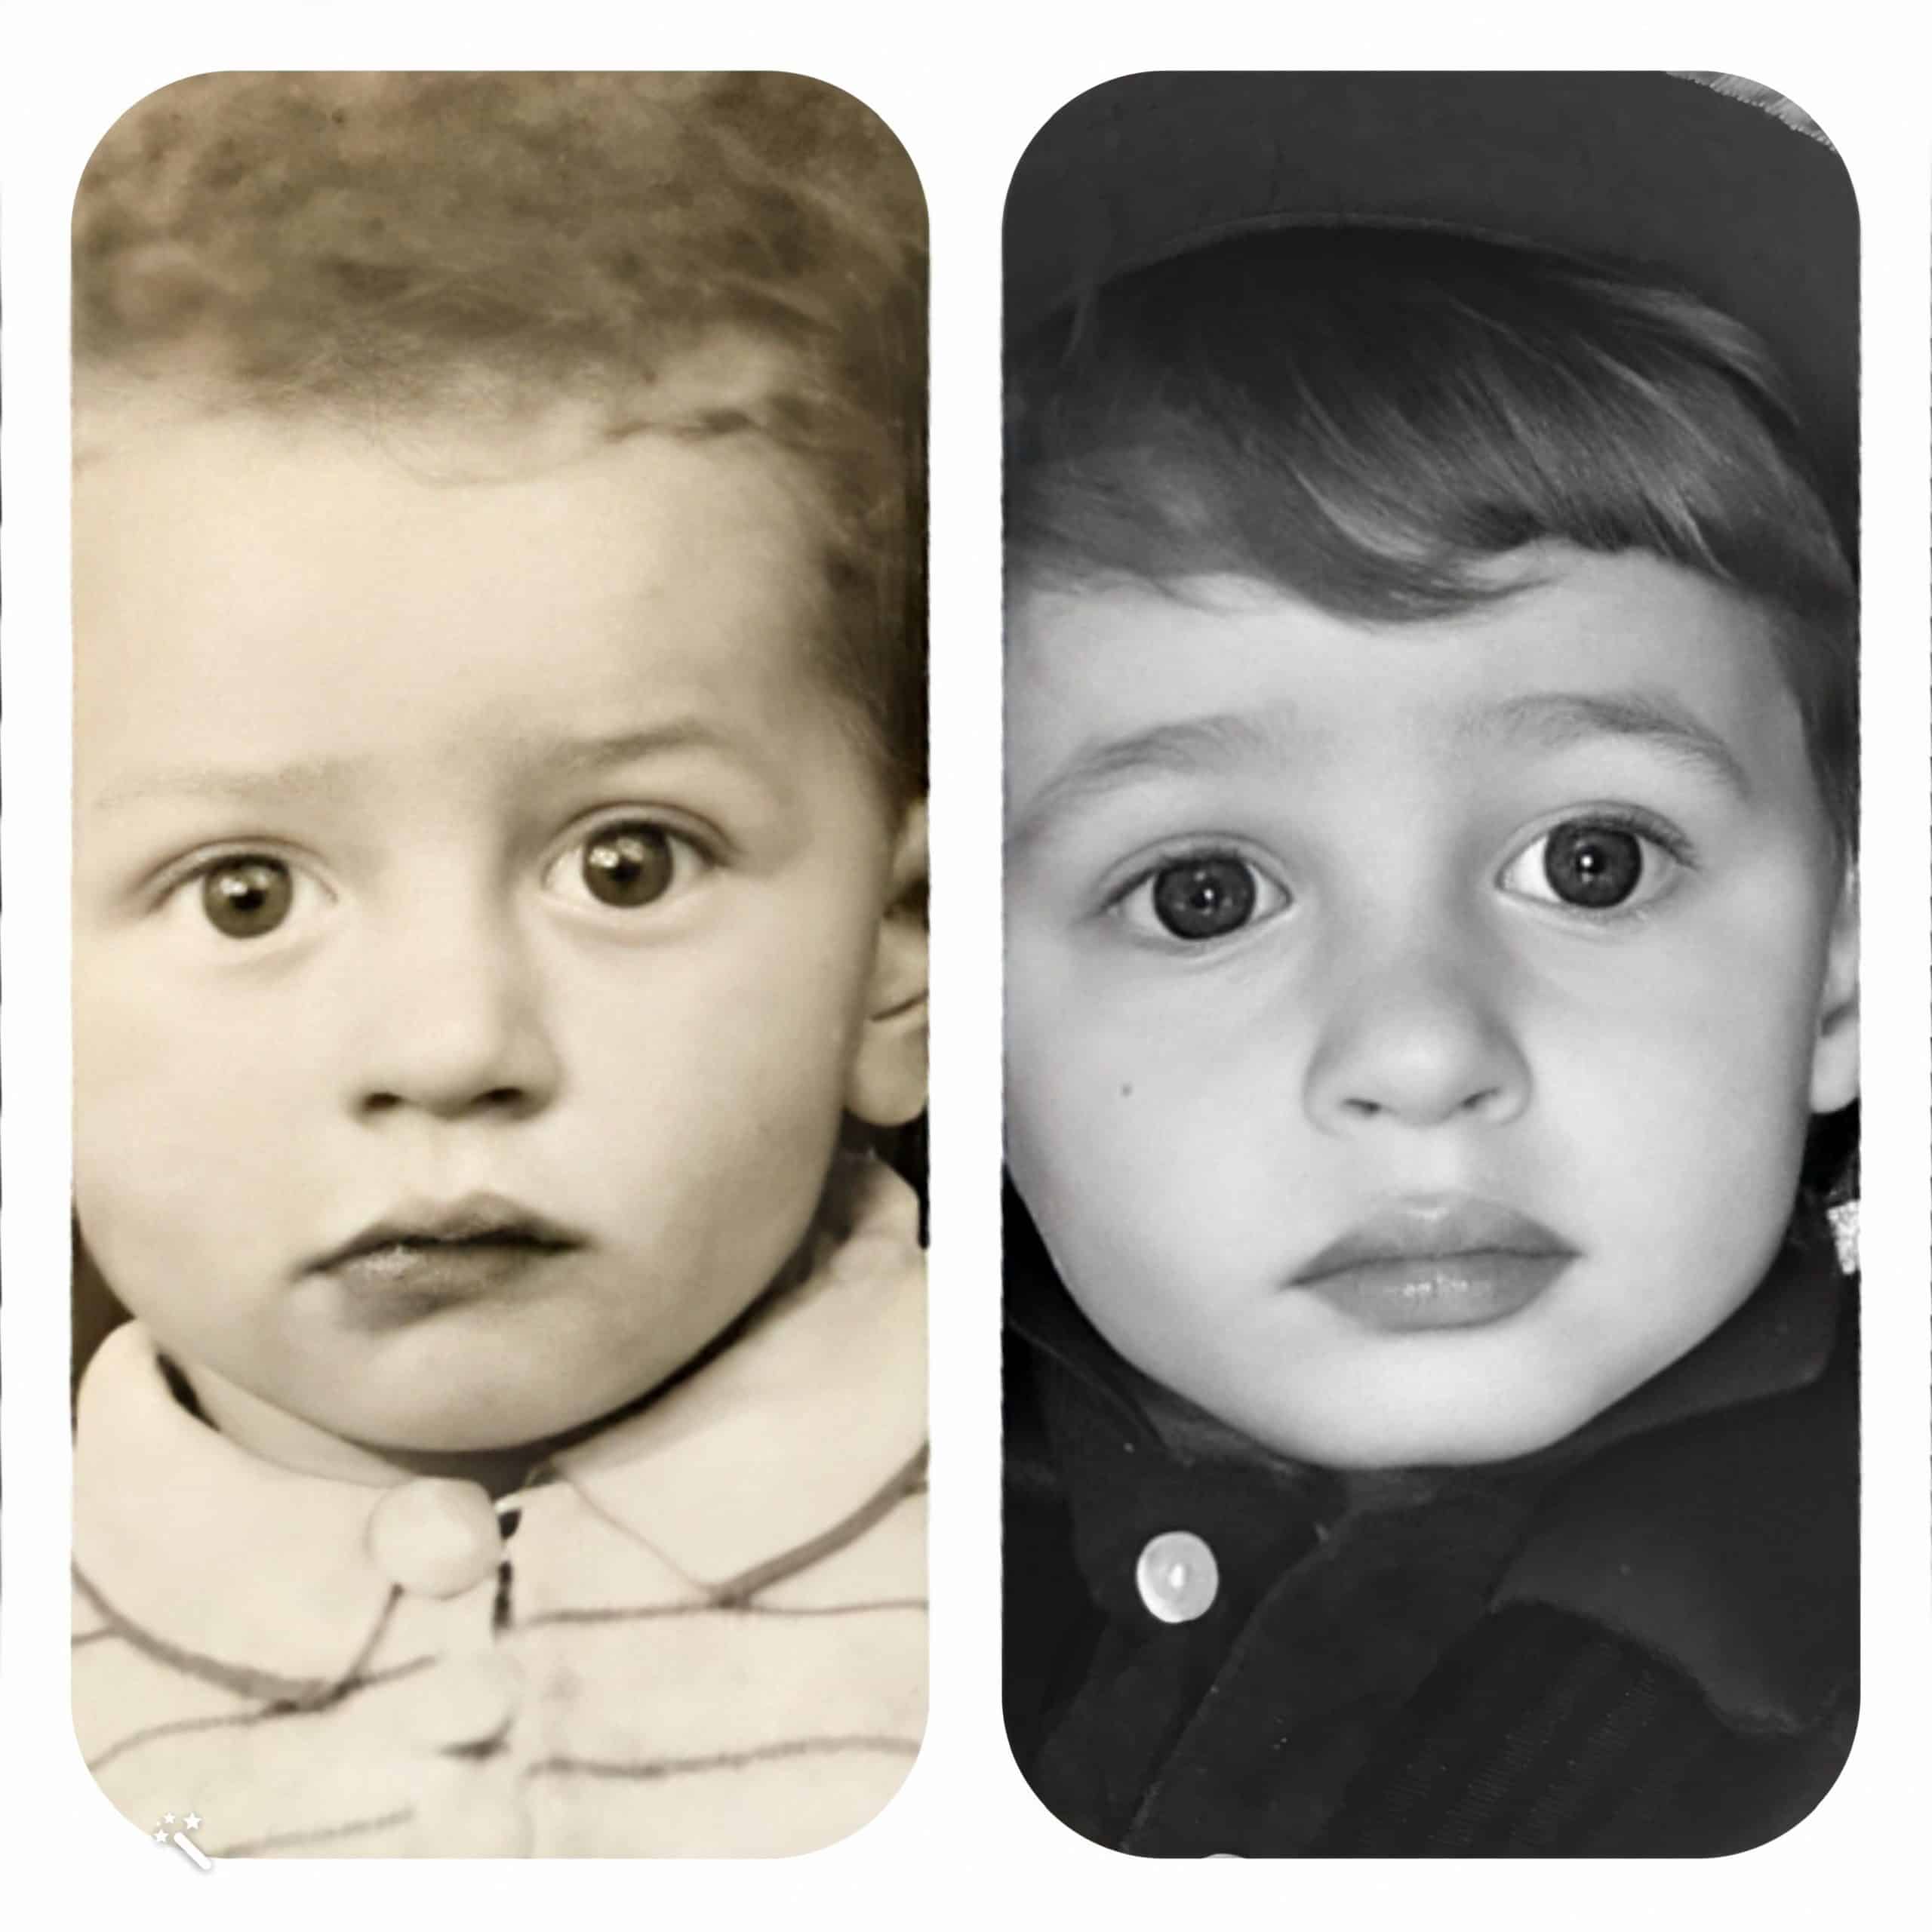 Images of very similar-lookin young boys side by side